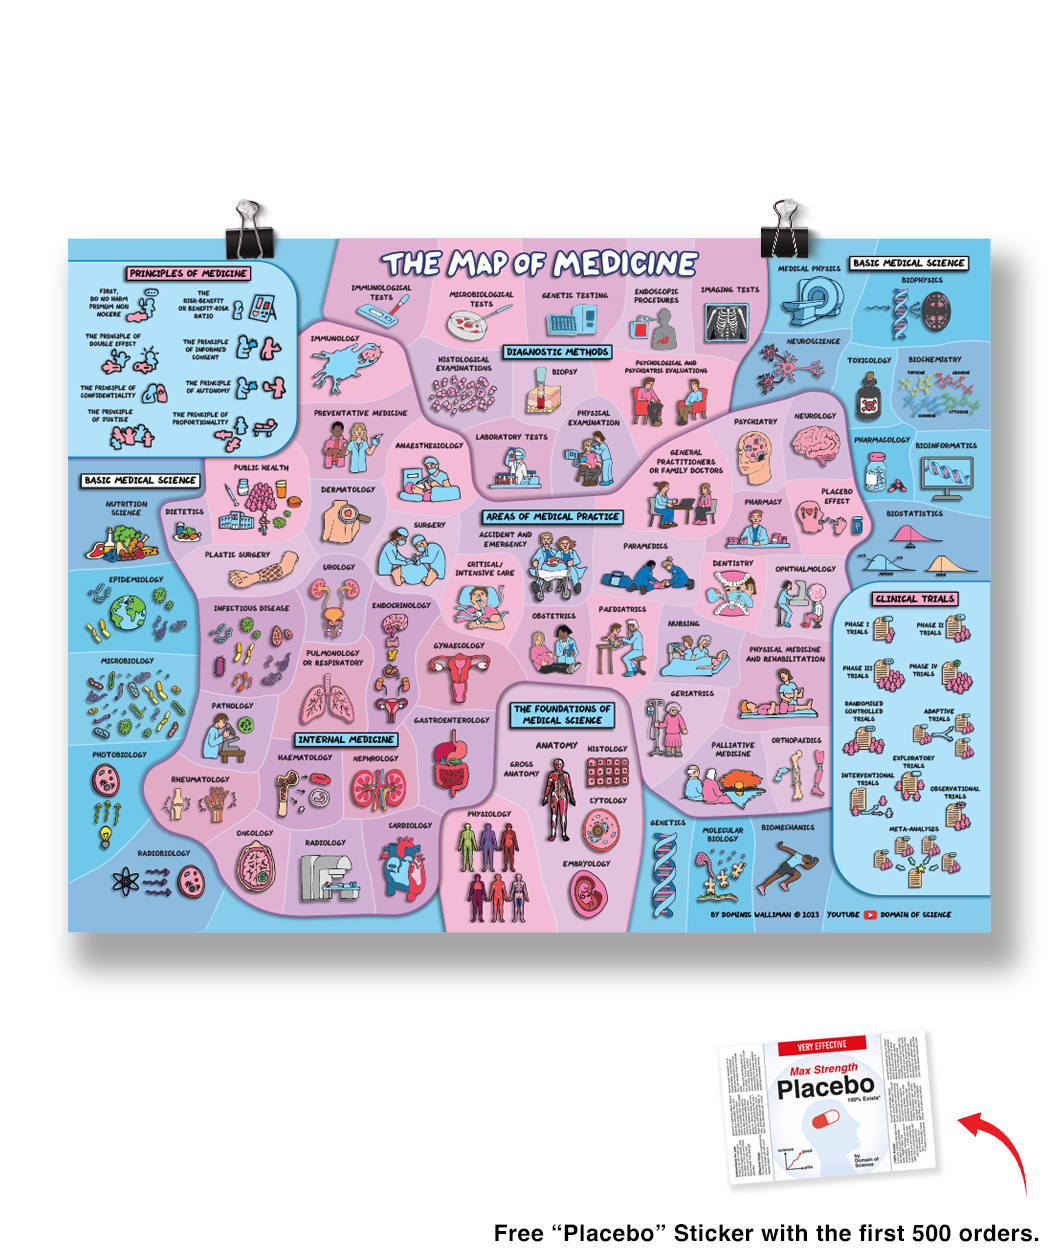 A landscape poster with many small icons illustrating different parts of medicine. The poster is called 